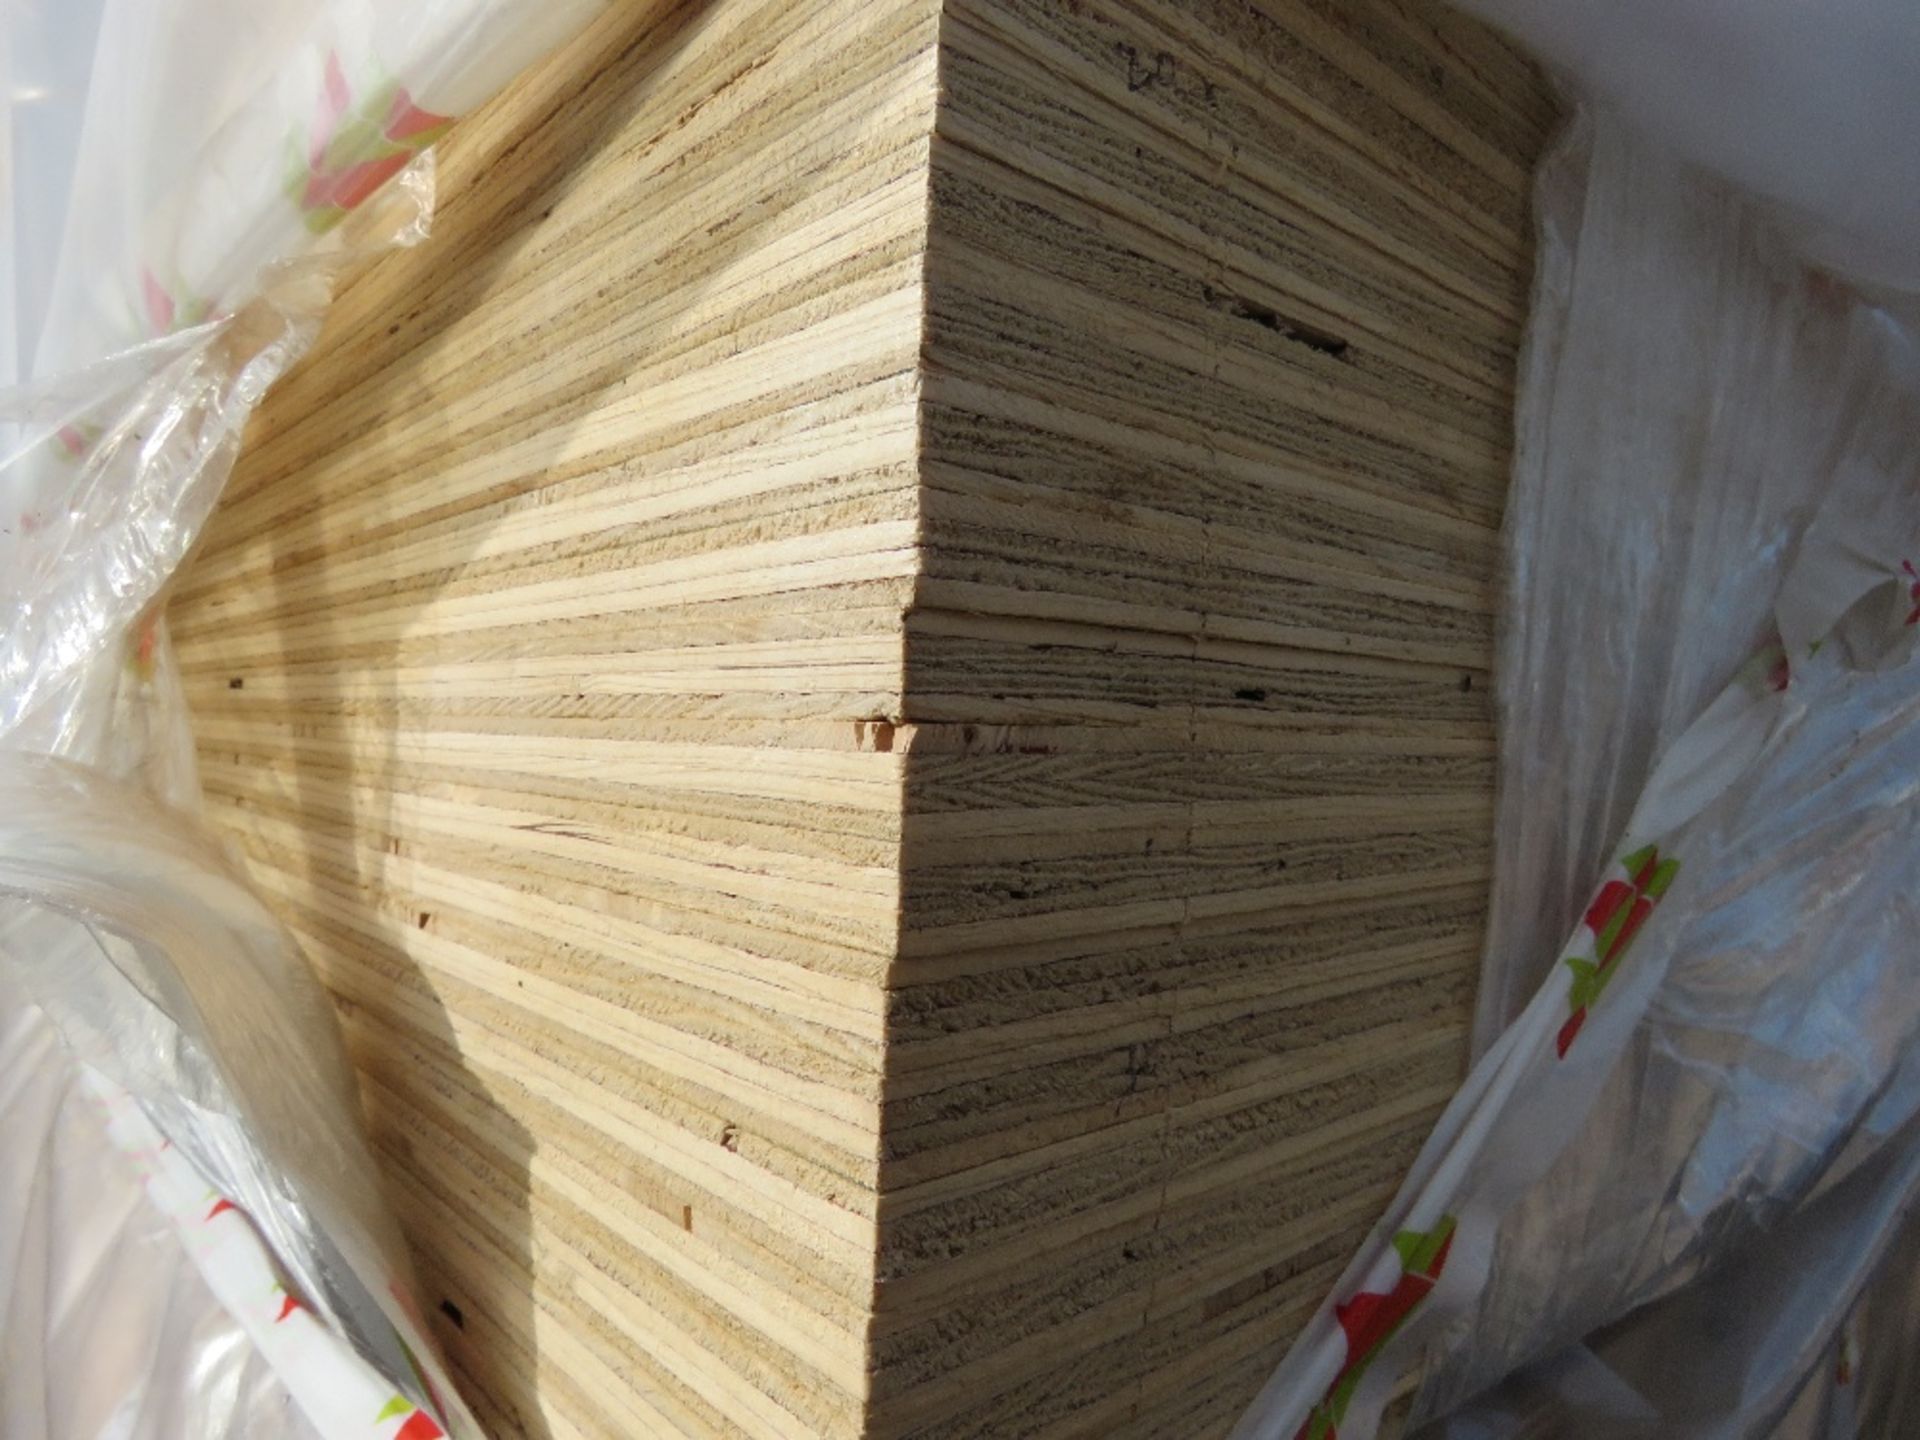 BUNDLE OF 36NO SHEETS OF 12MM PLYWOOD, DIRECT FROM SITE CLEARANCE. THIS LOT IS SOLD UNDER THE AUC - Image 3 of 3